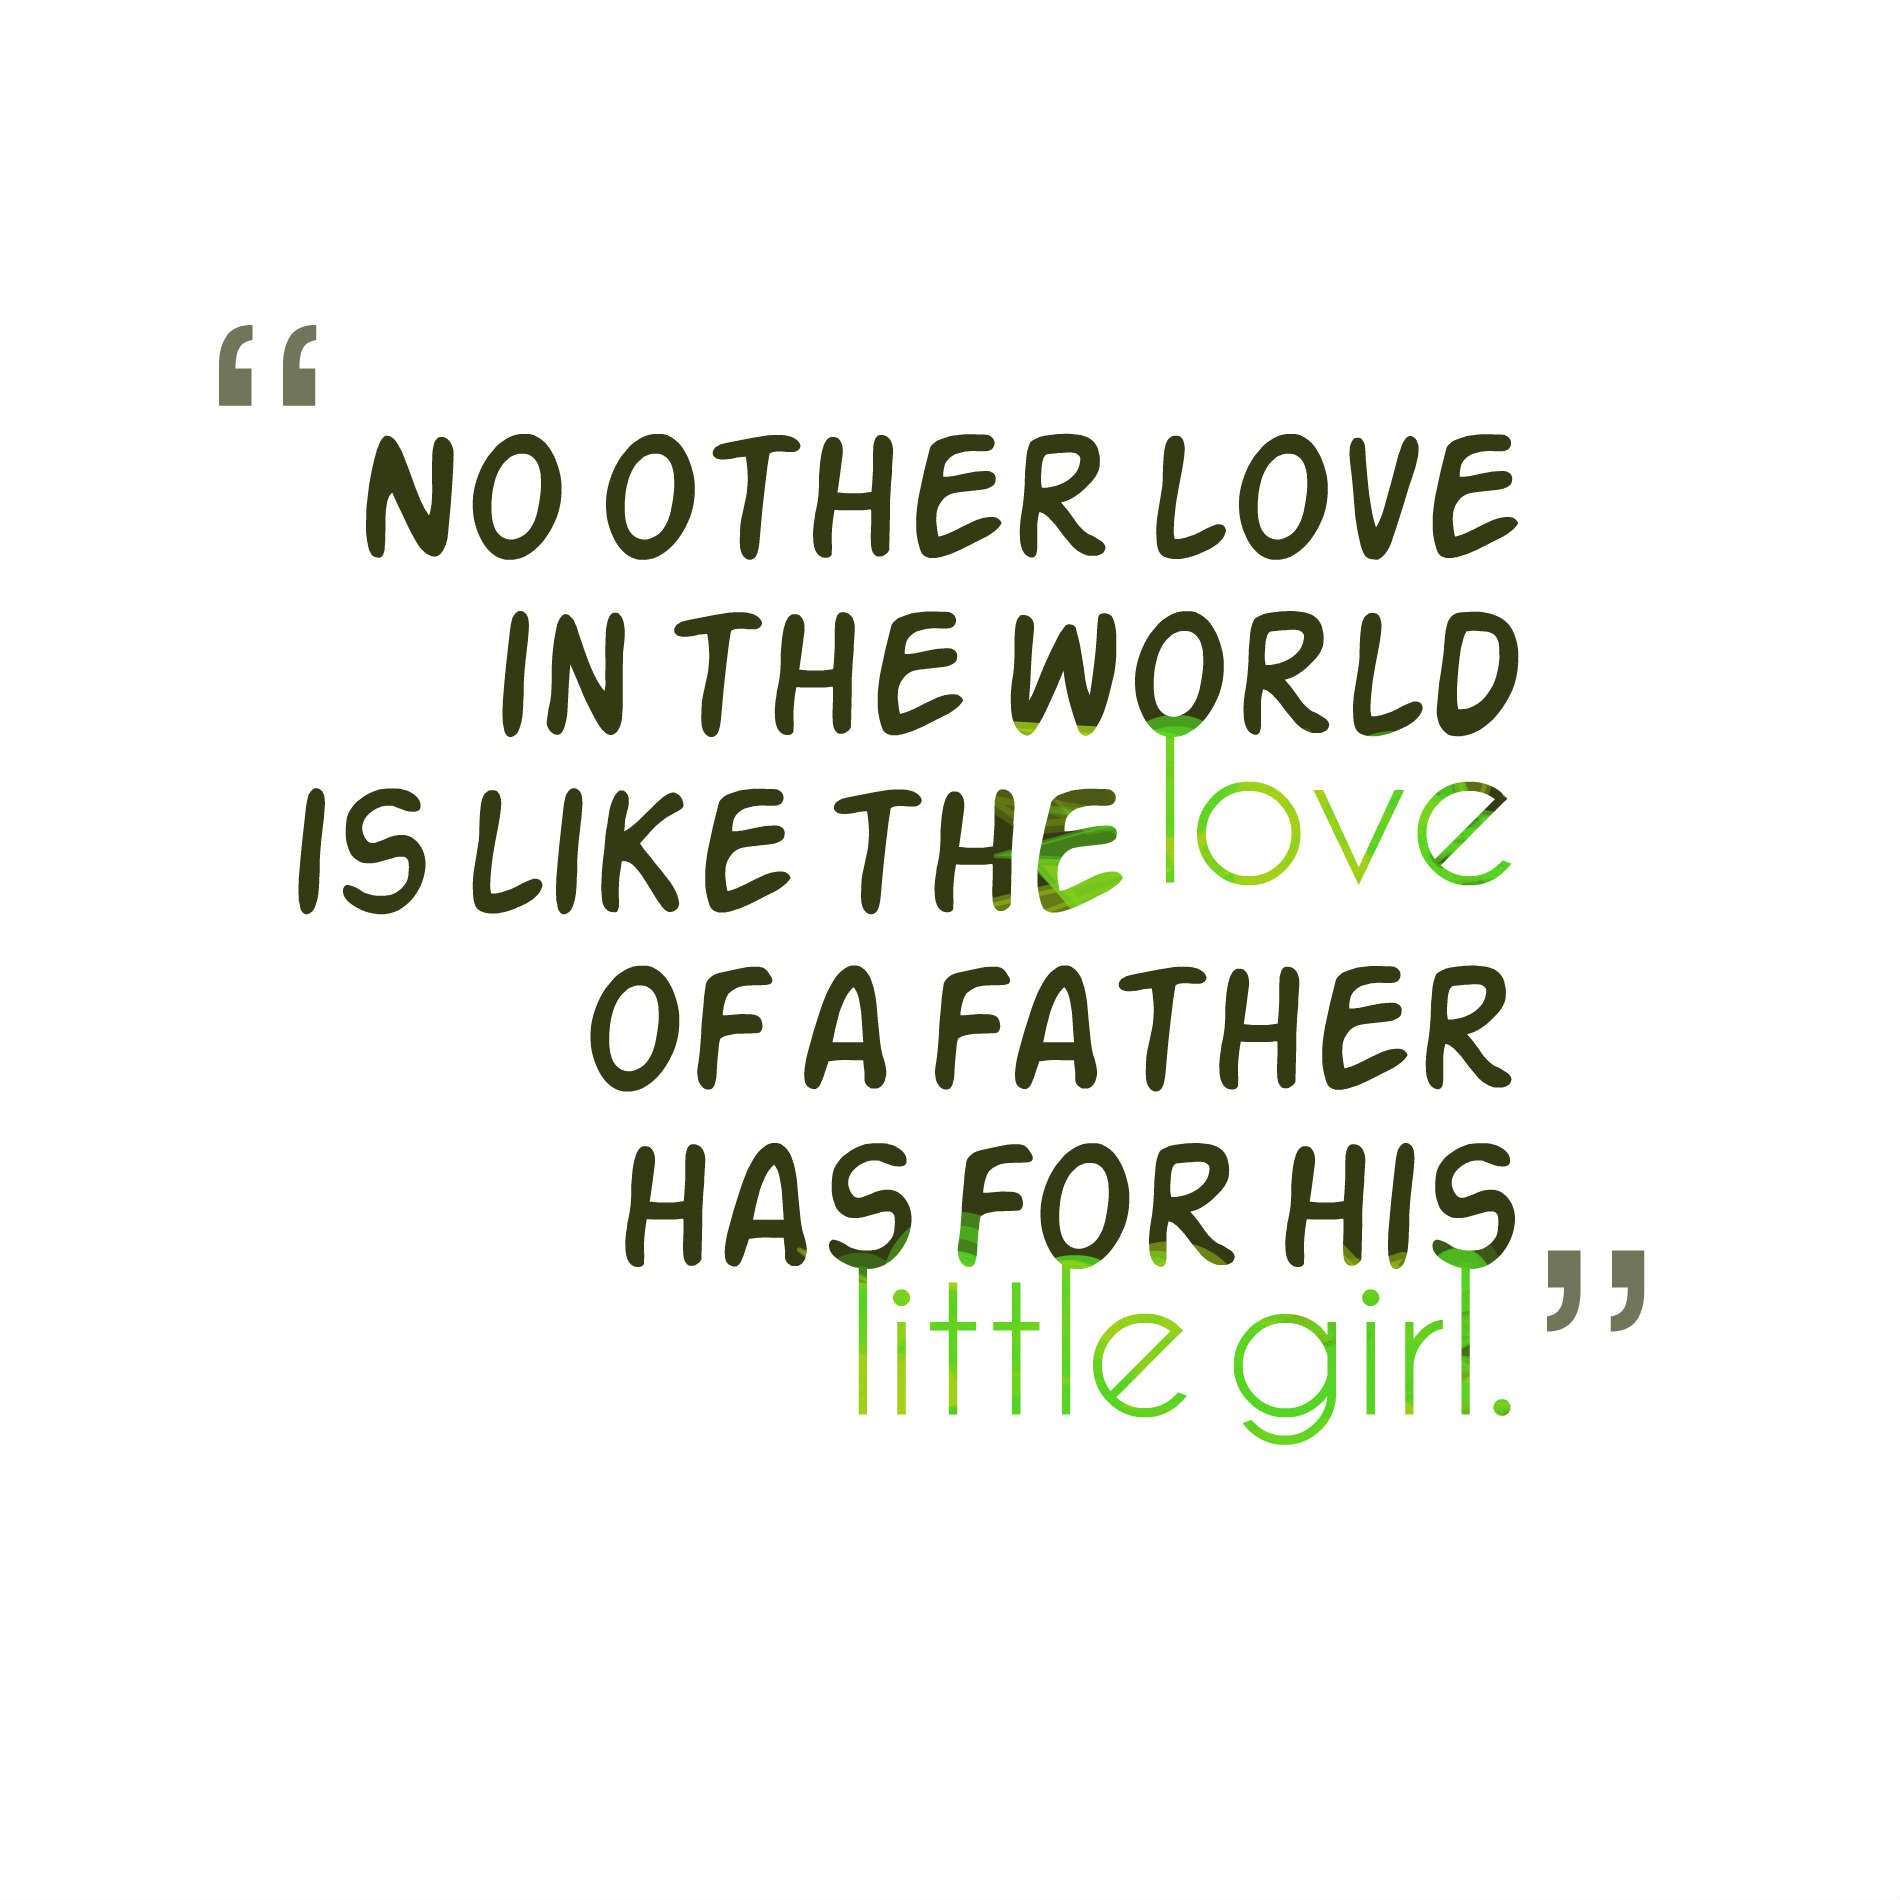 No other love in the world is like the love of a father has for his little girl.